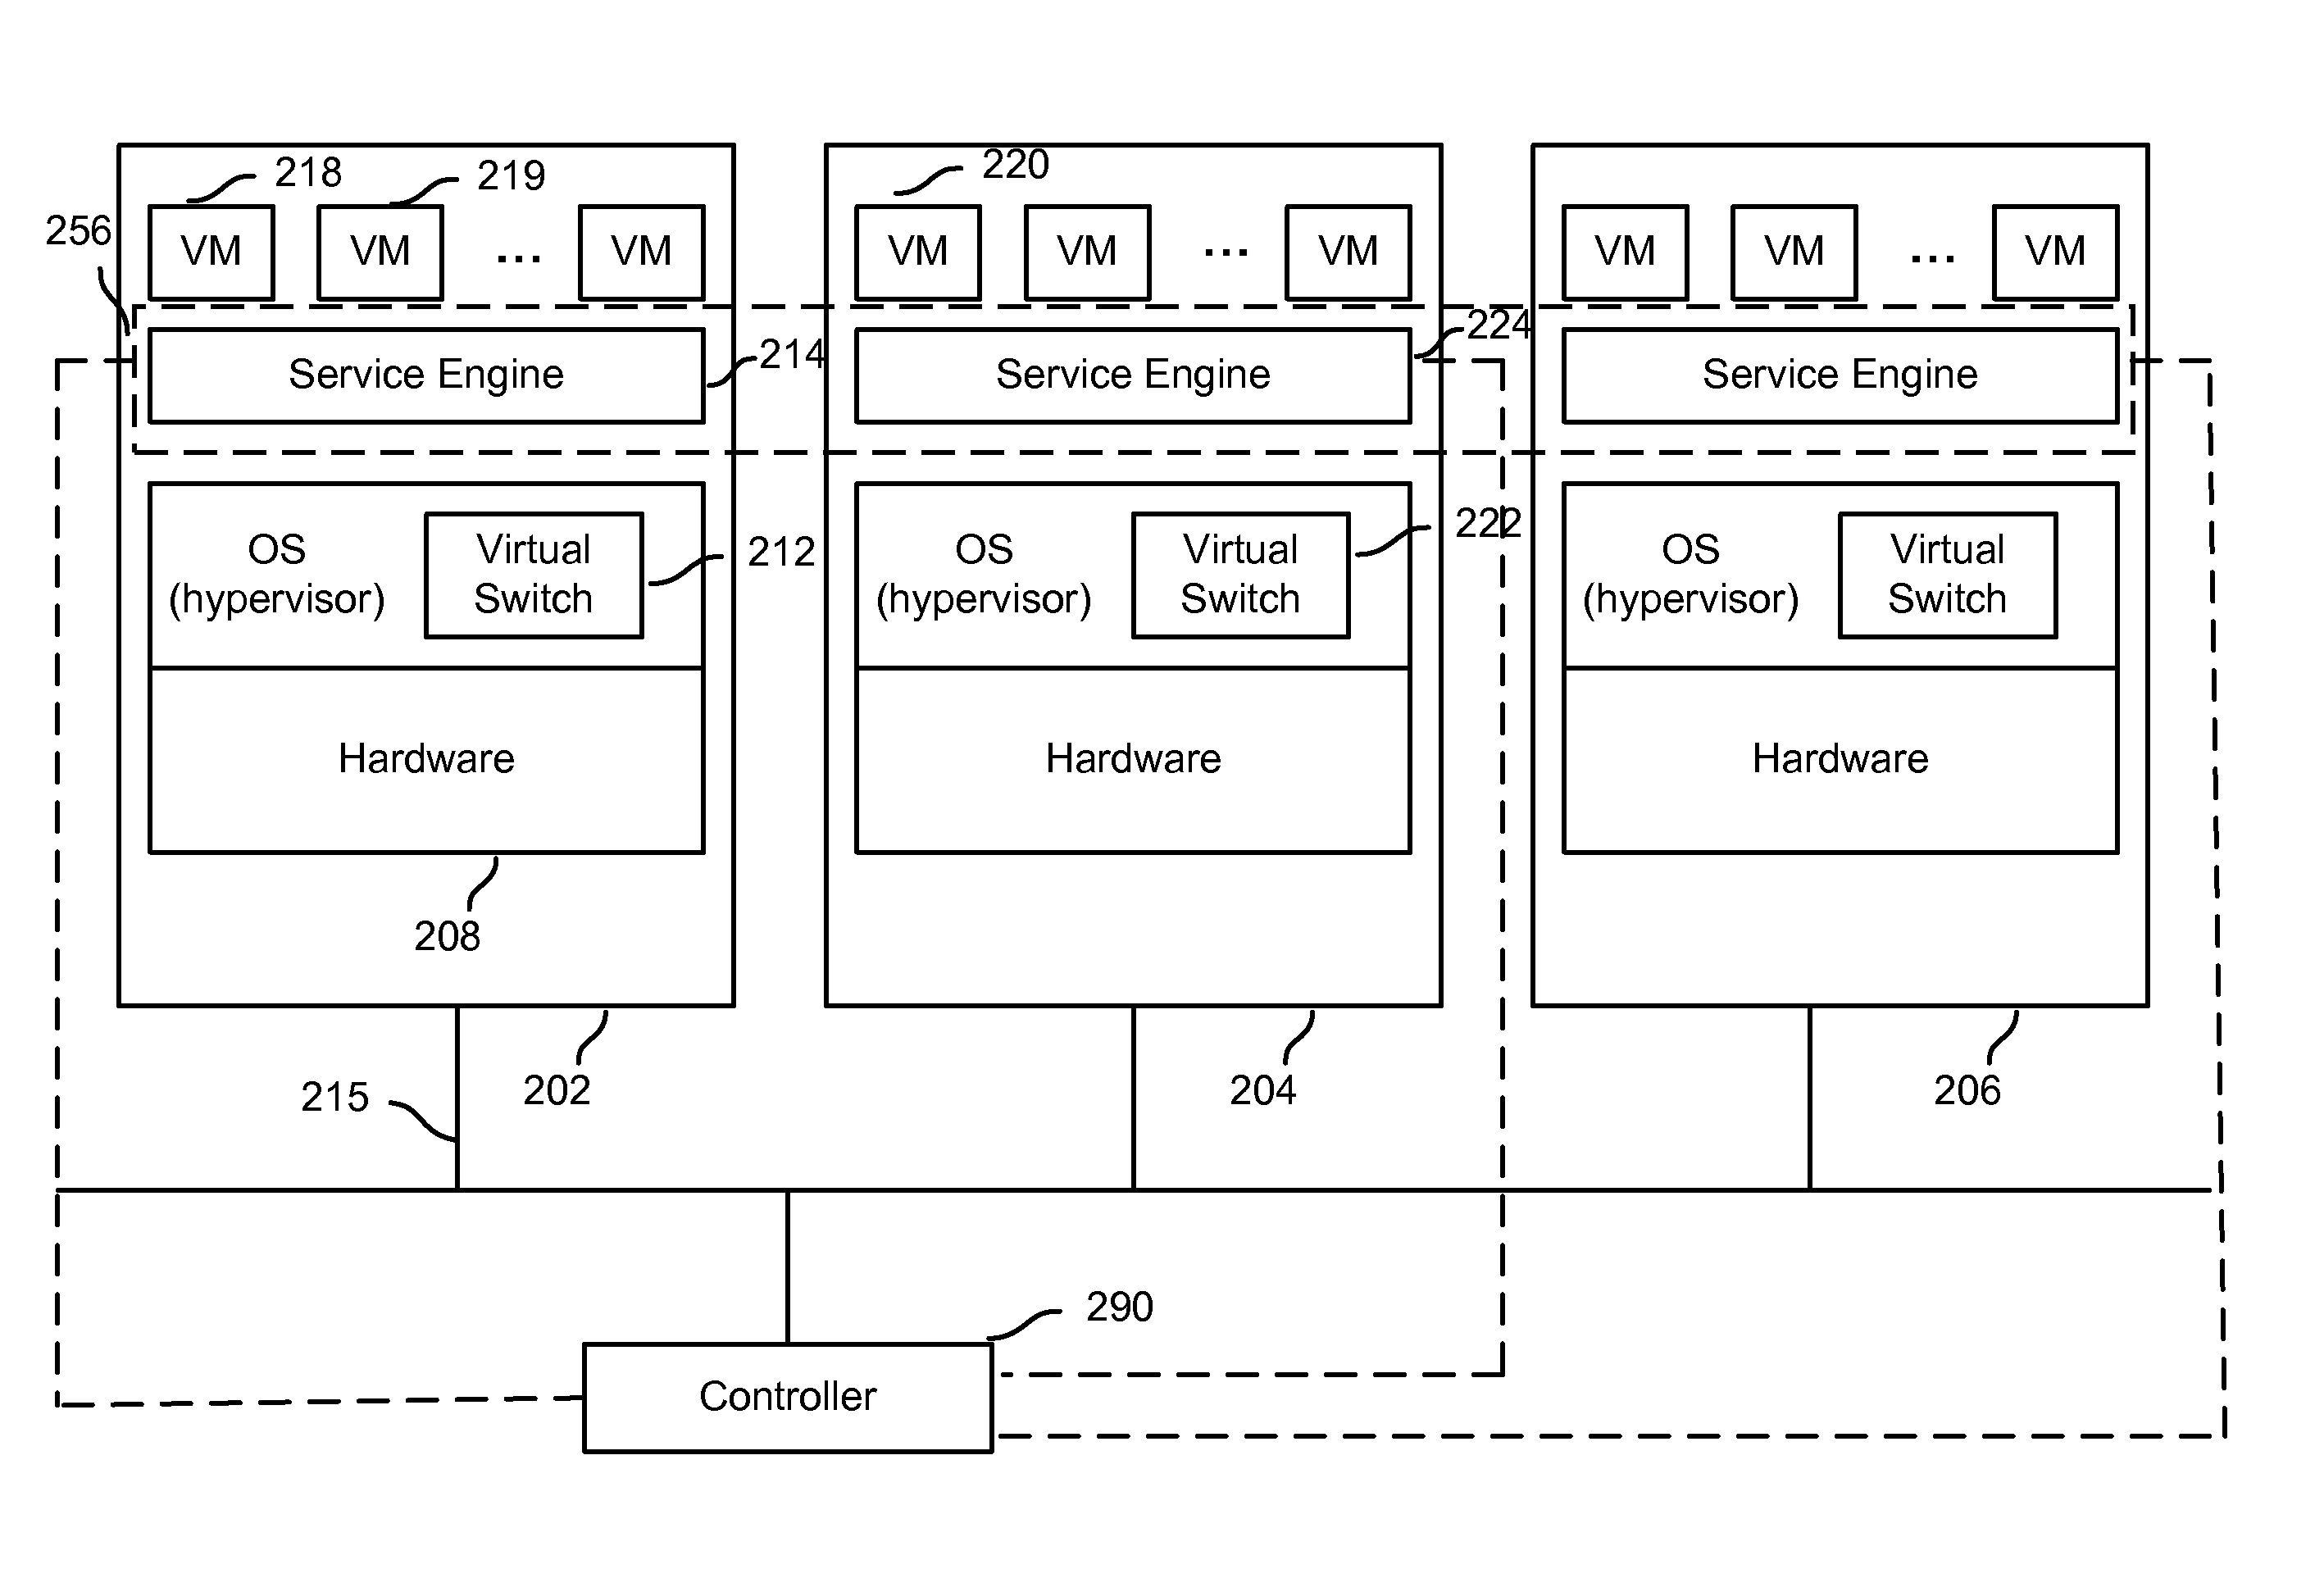 Managing and controlling a distributed network service platform